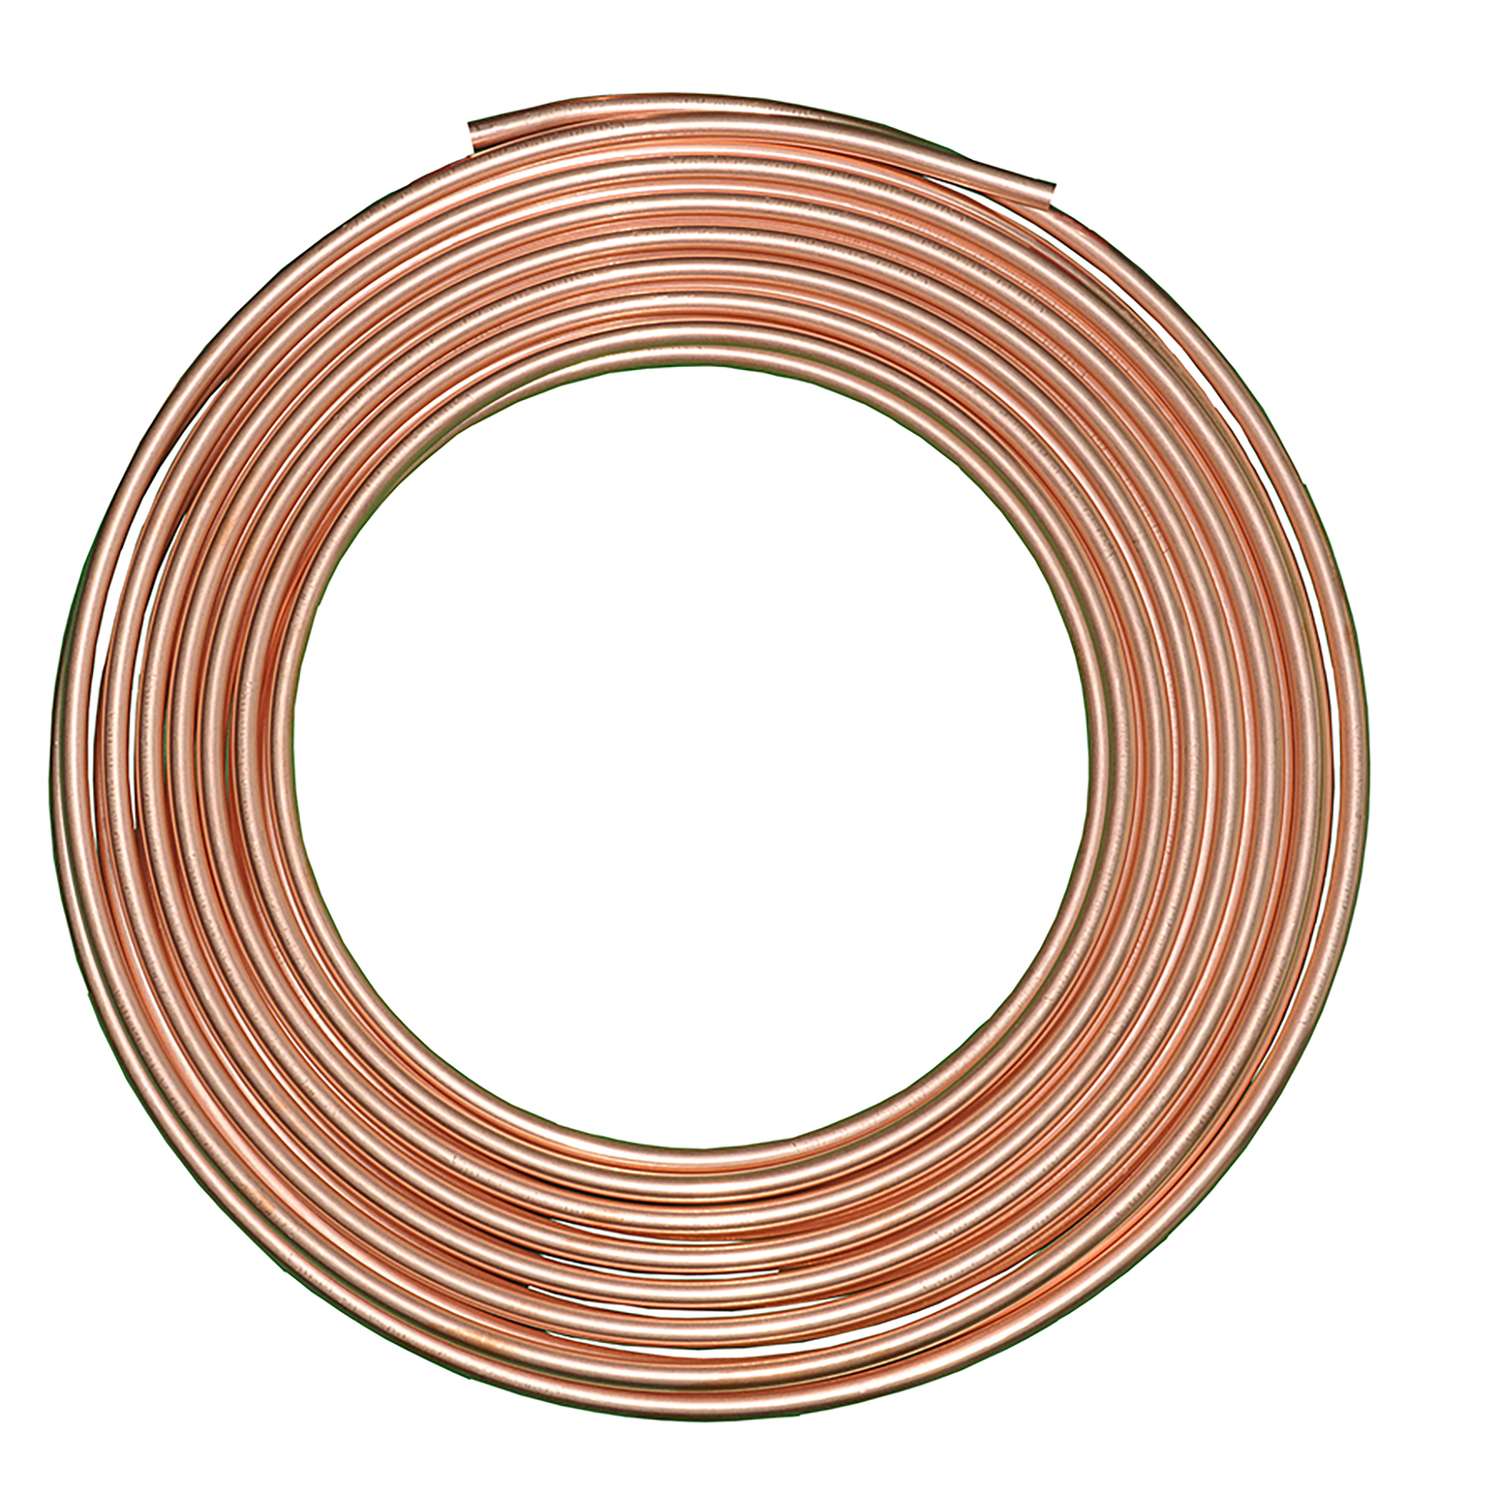 x 48 inches 1.125 1 NPS 3 Pack Online Metal Supply Copper Tube Type L